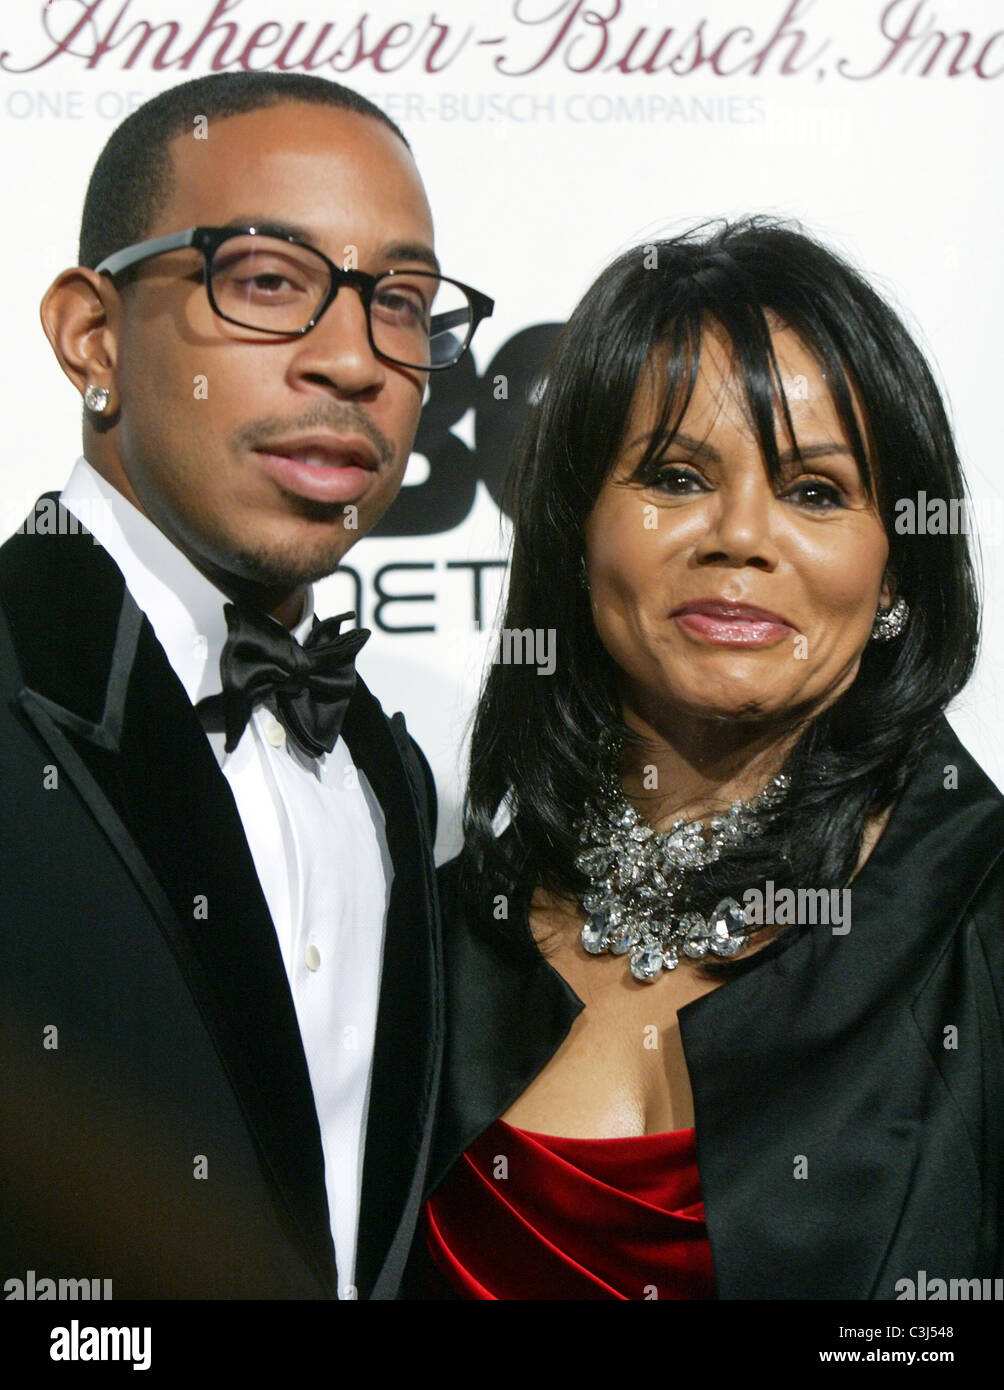 Rapper/Actor Ludacris arrive at The Ludacris Foundation 6th Annual Benefit Dinner in the Ronald Reagan Building Washington DC, Stock Photo